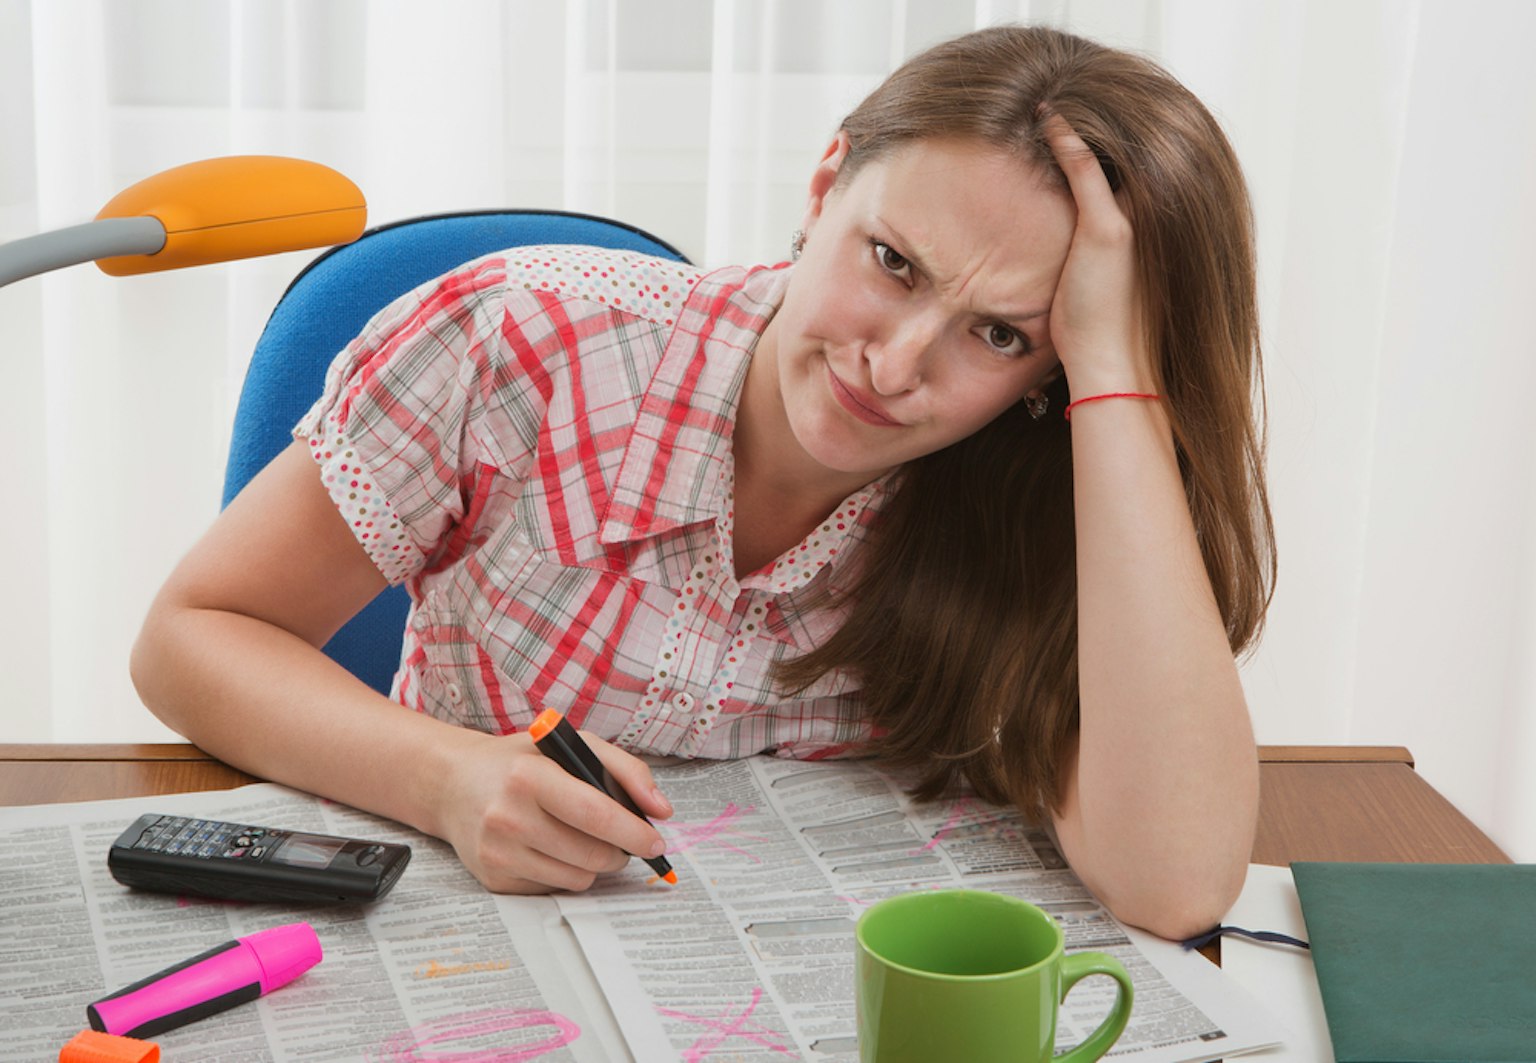 Woman writing on newspaper while looking upset